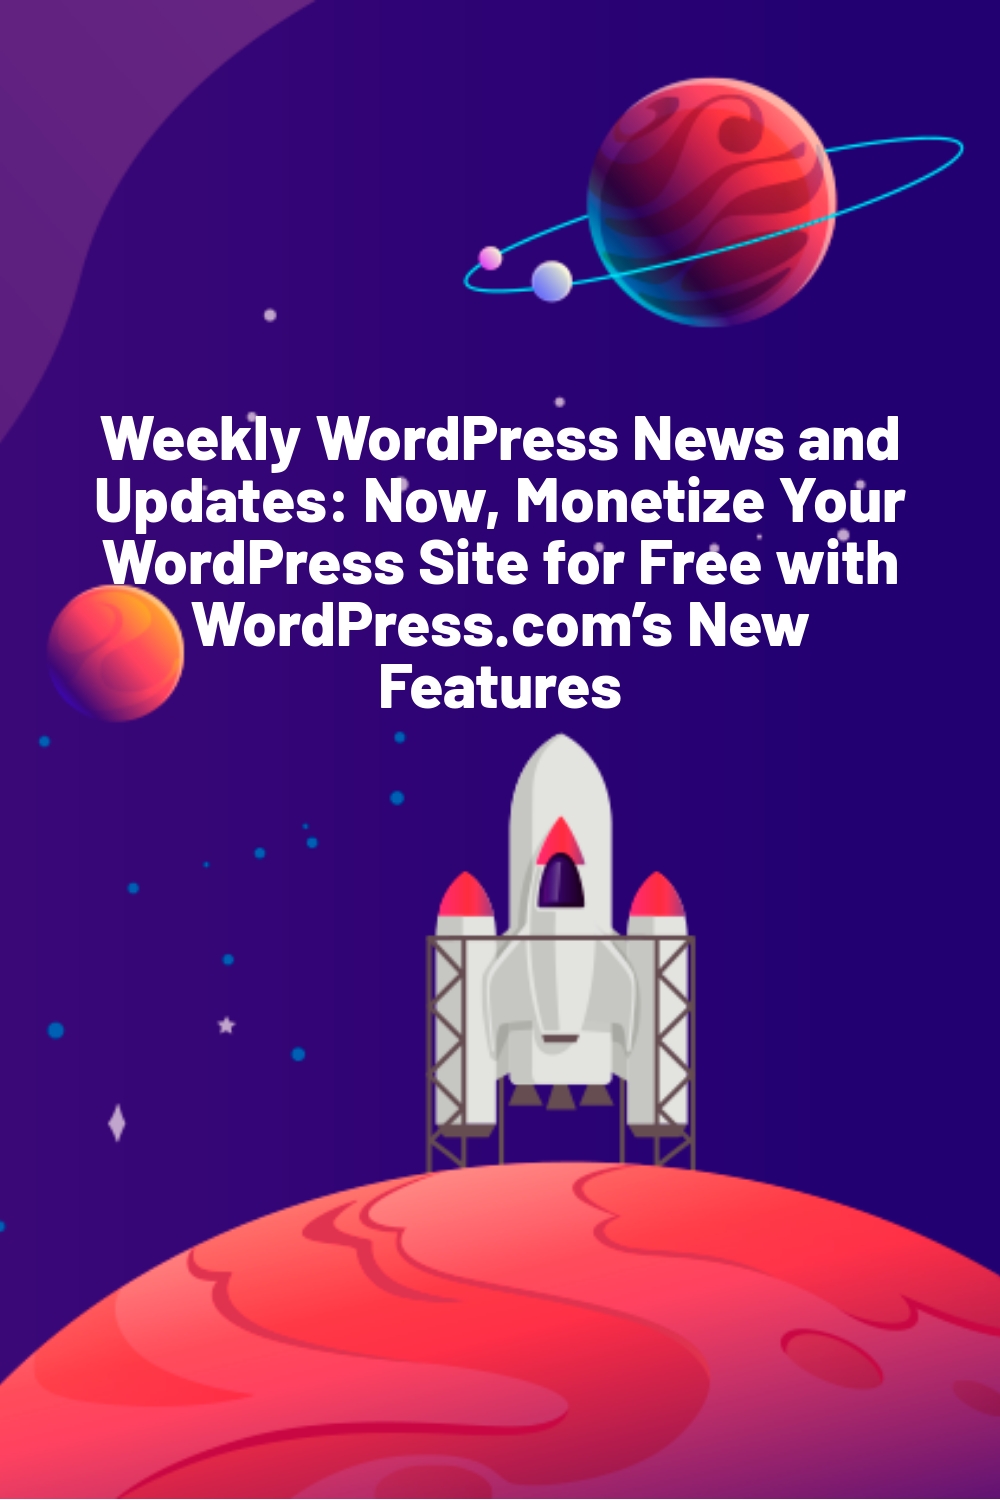 Weekly WordPress News and Updates: Now, Monetize Your WordPress Site for Free with WordPress.com’s New Features